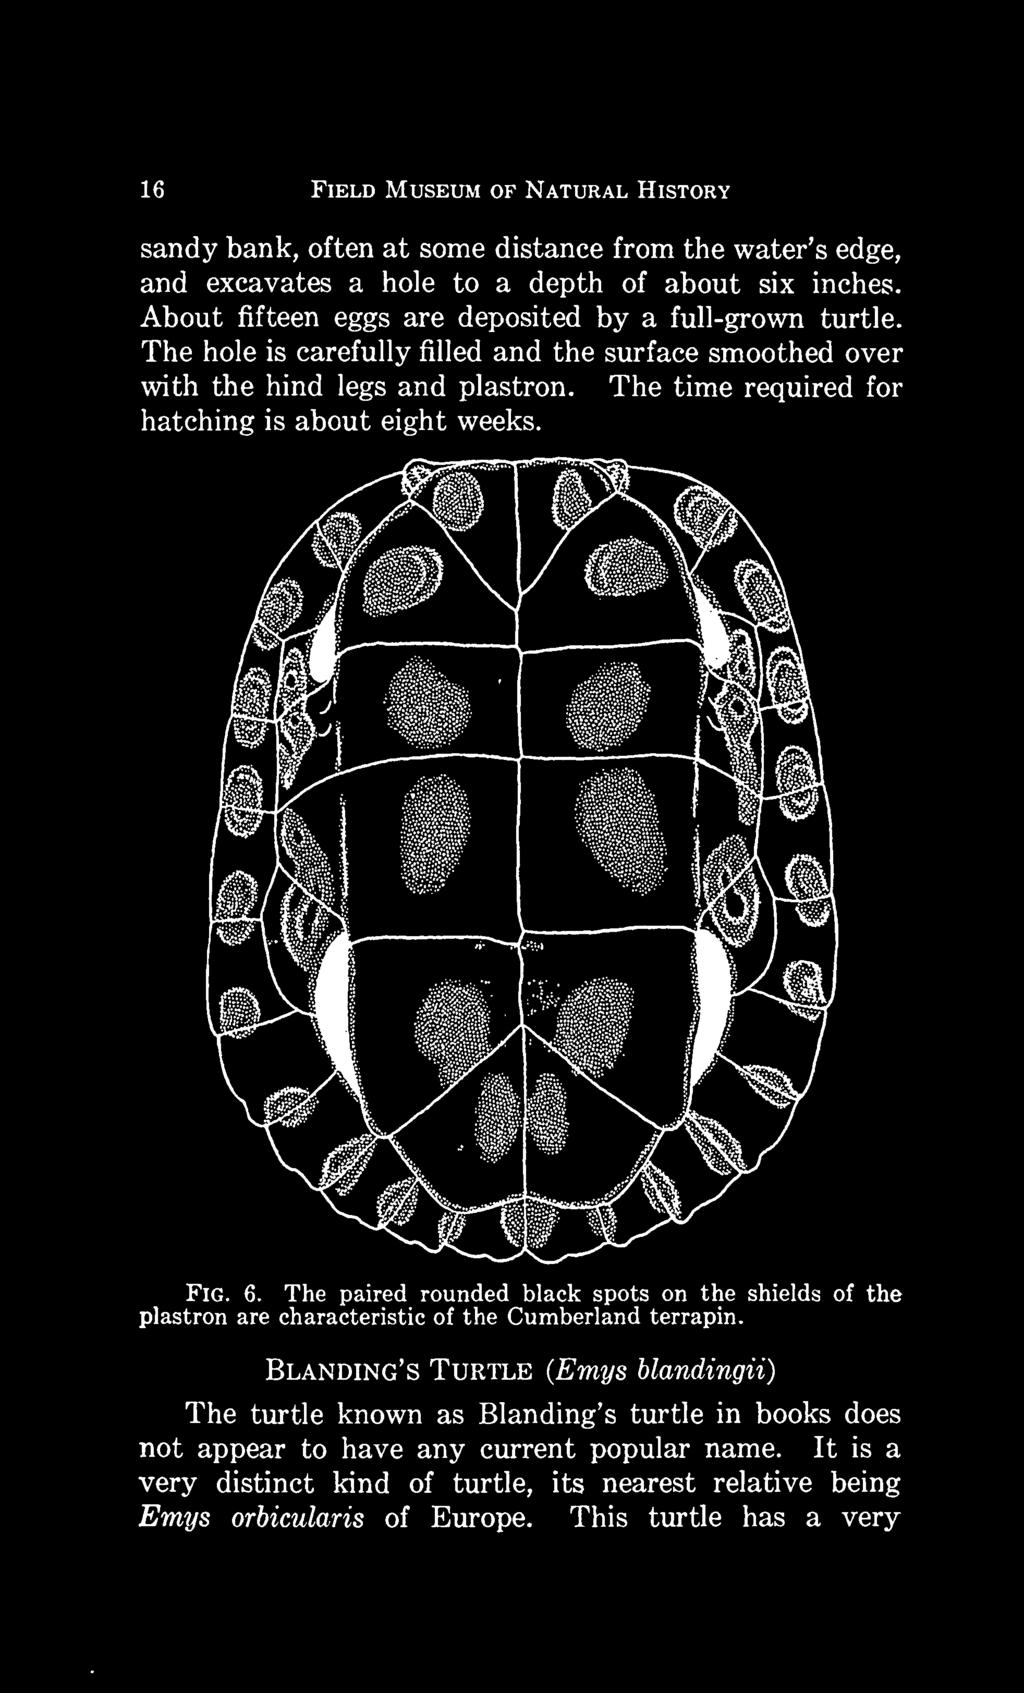 The time required for hatching is about eight weeks. Fig. 6. The paired rounded black spots on the shields of the plastron are characteristic of the Cumberland terrapin.